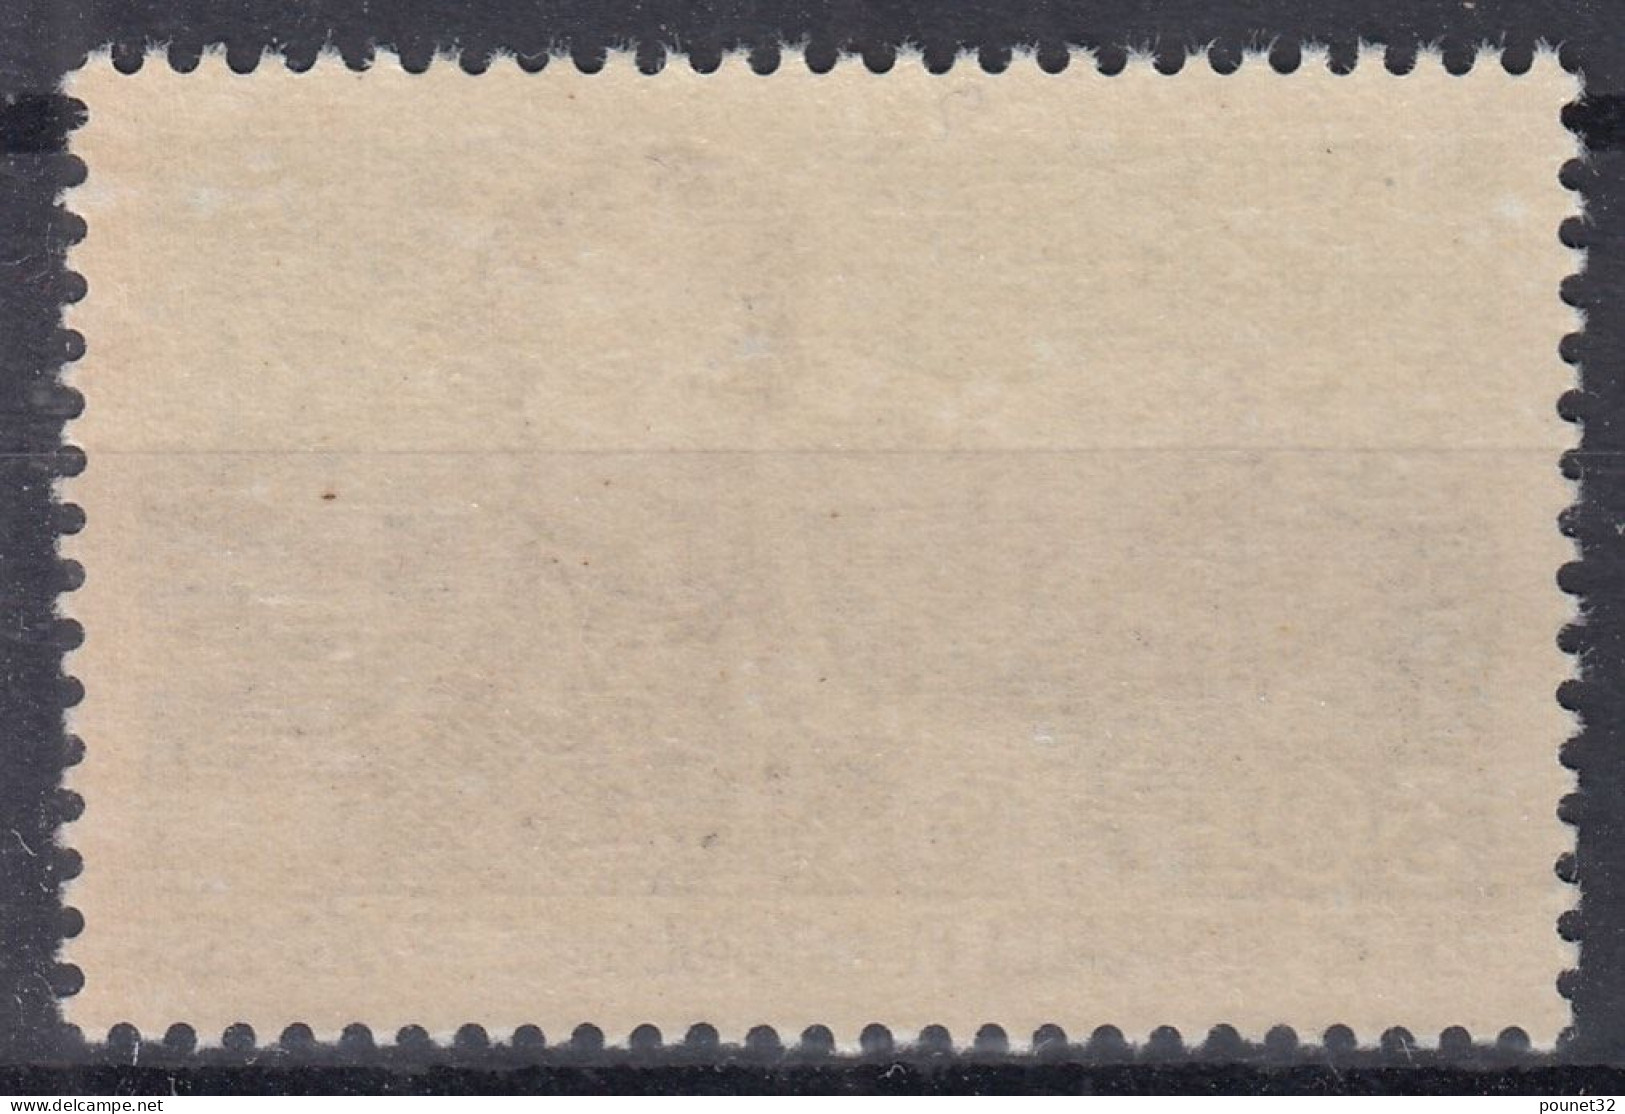 TIMBRE TAAF AMIRAL DUMONT D'URVILLE N° 25 NEUF ** GOMME SANS CHARNIERE - Unused Stamps